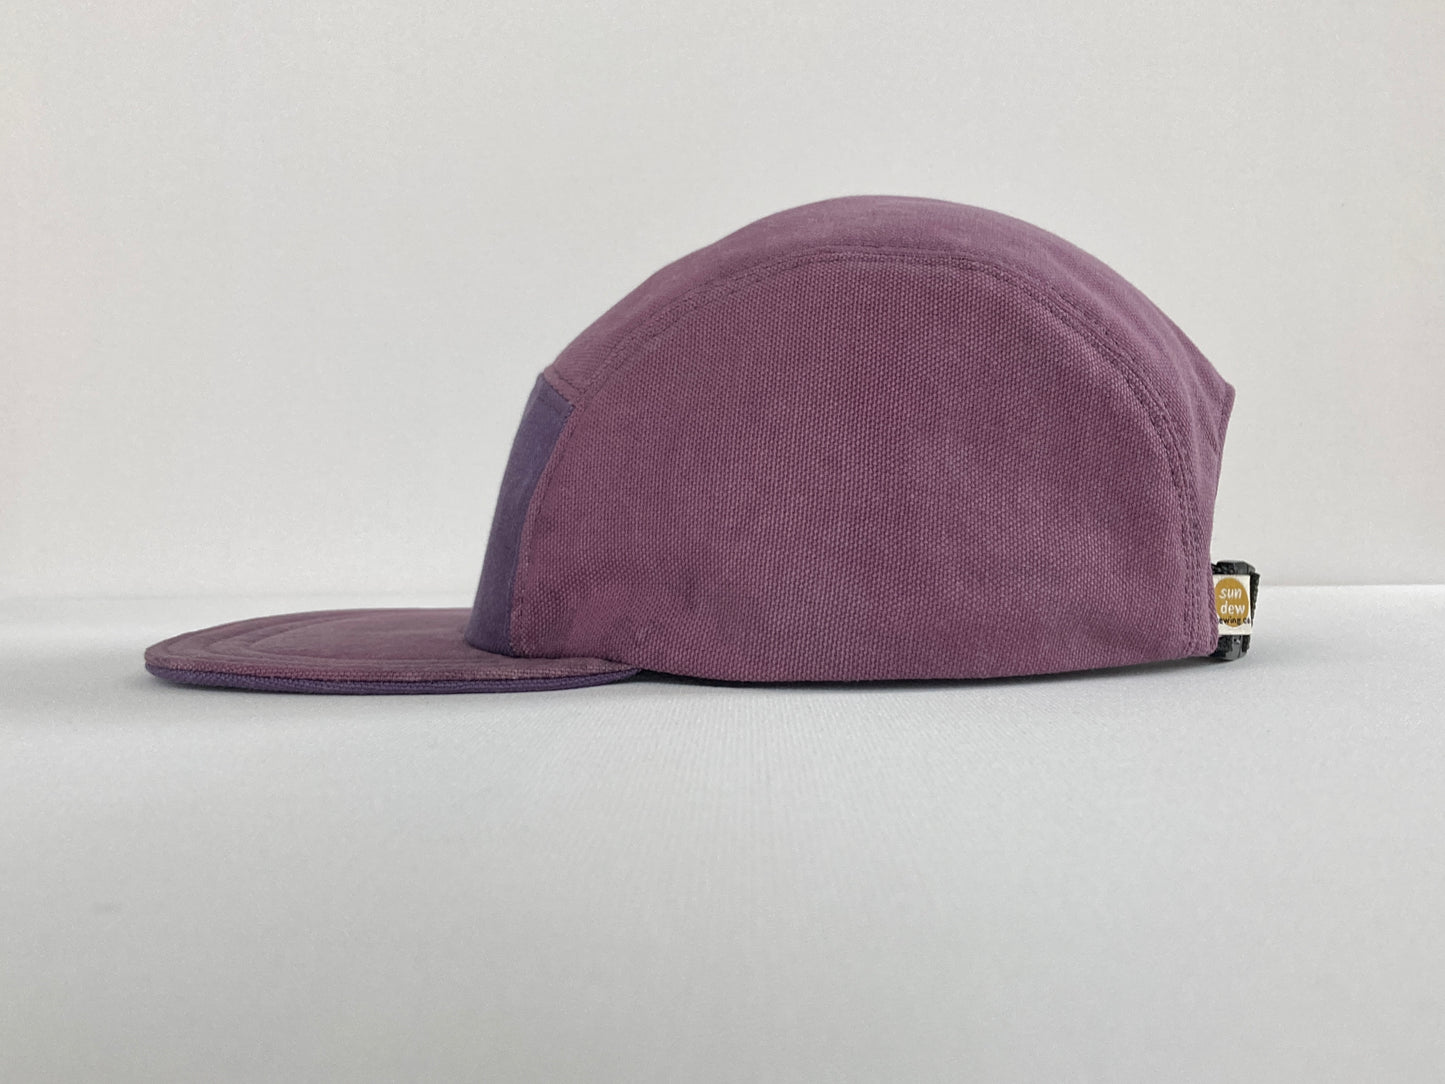 Naturally Dyed Camp Hat - Plum